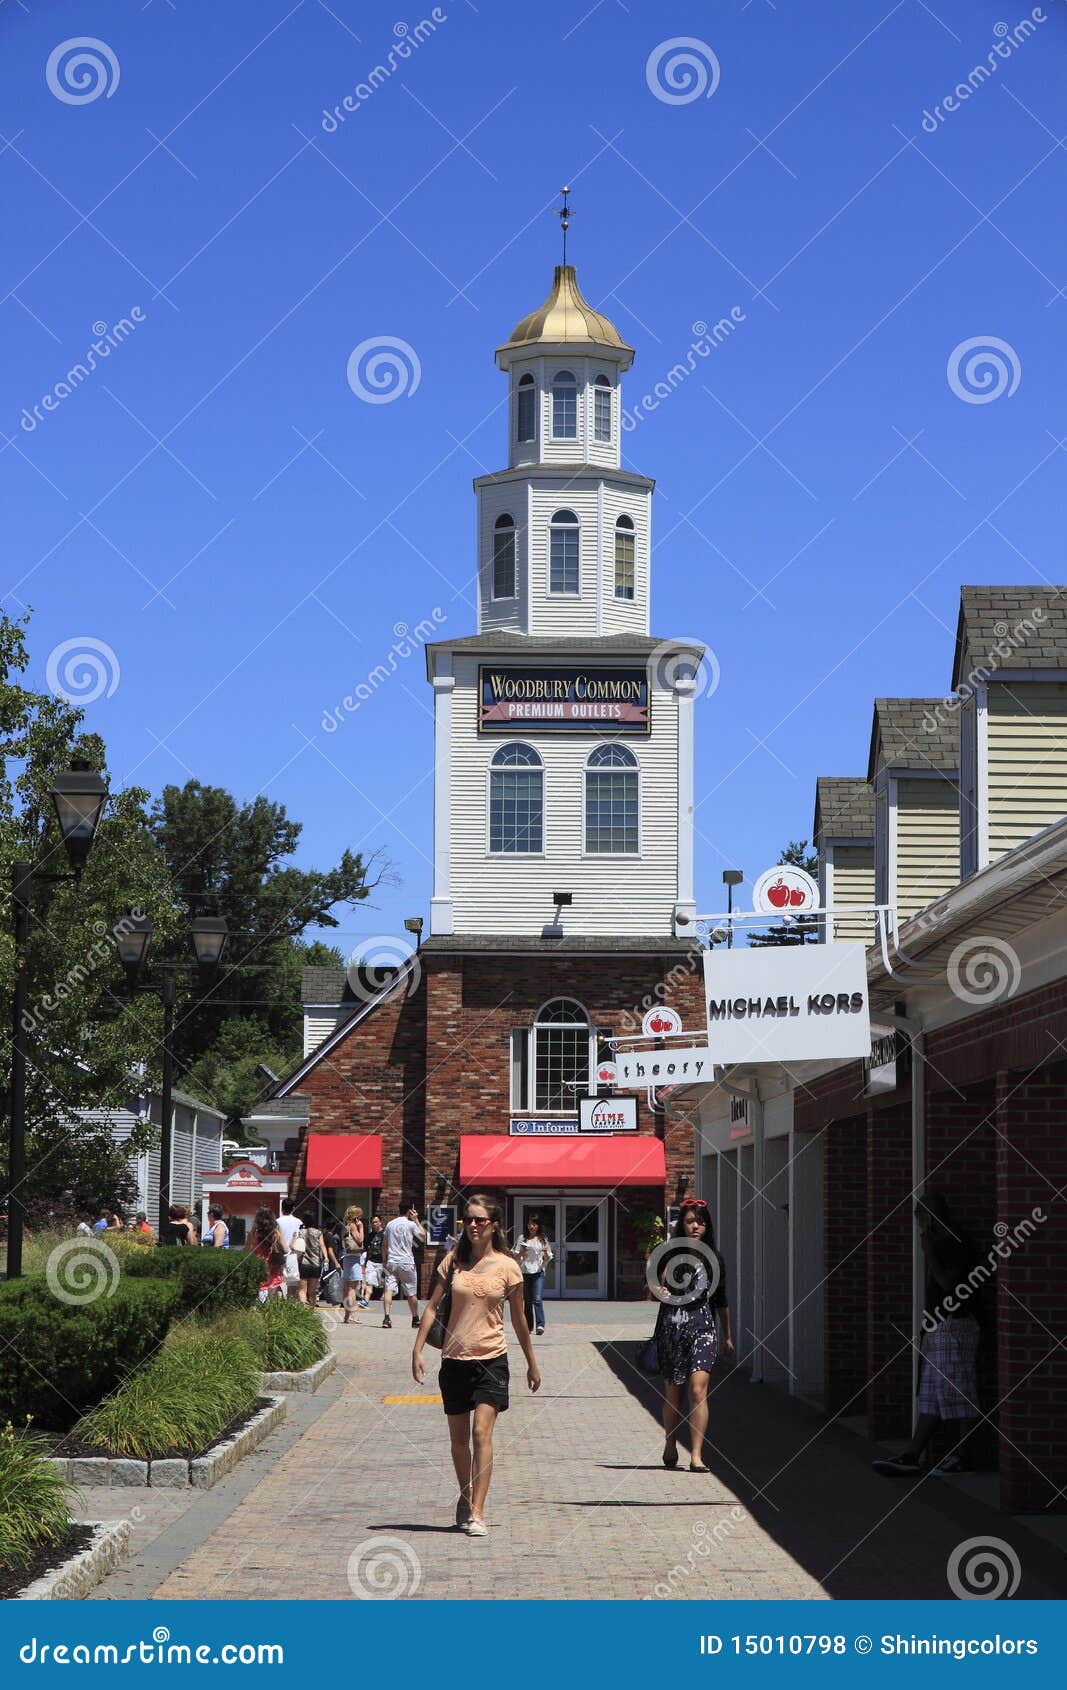 138 Woodbury Common Stock Photos - Free & Royalty-Free Stock Photos from  Dreamstime